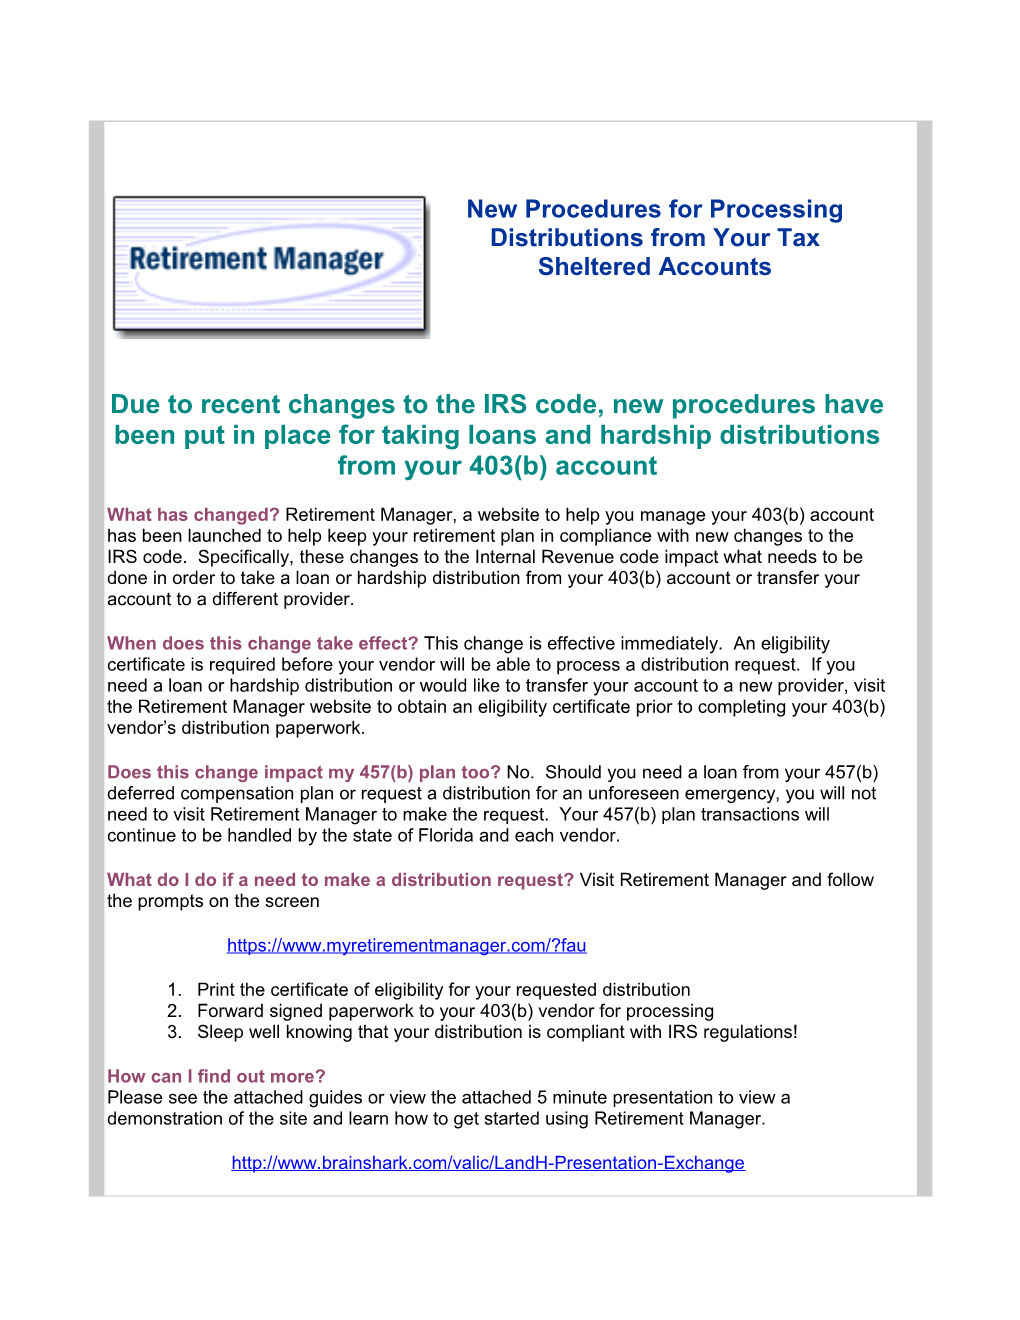 Due to Recent Changes to the IRS Code, New Procedures Have Been Put in Place for Taking